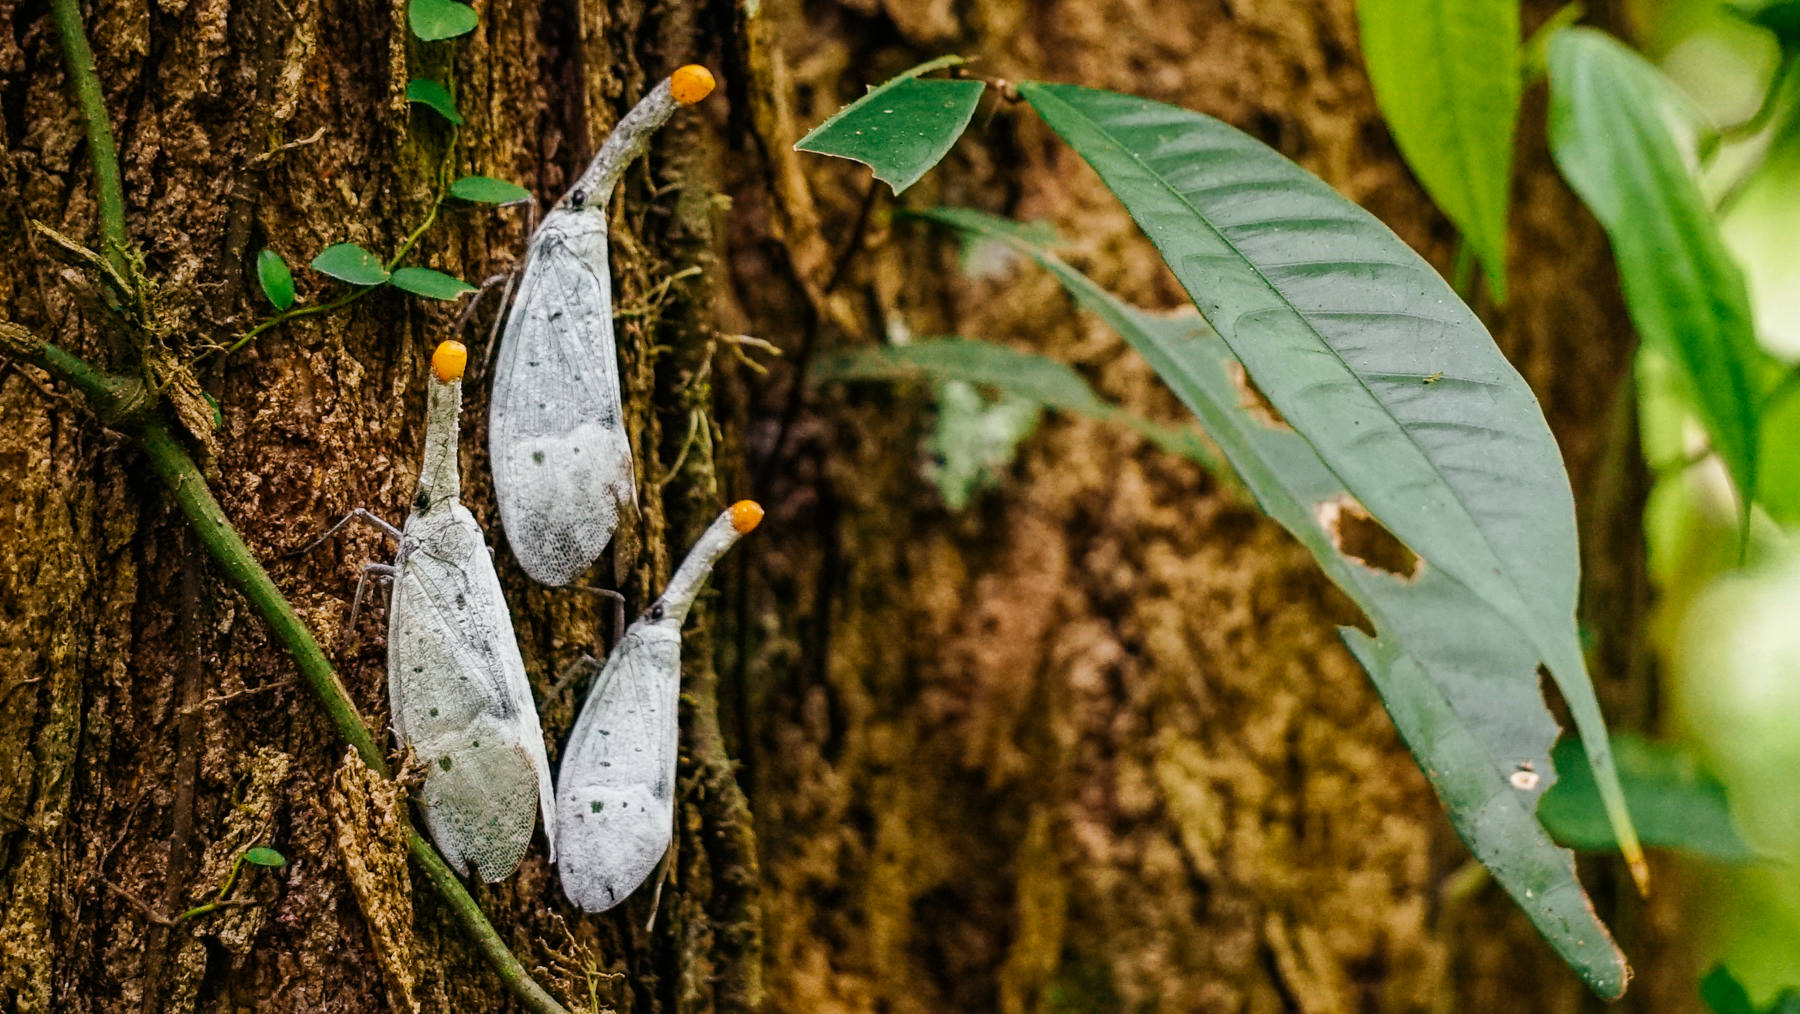 Pyrops Pythica Lanternfly insects on a tree in Sumatra